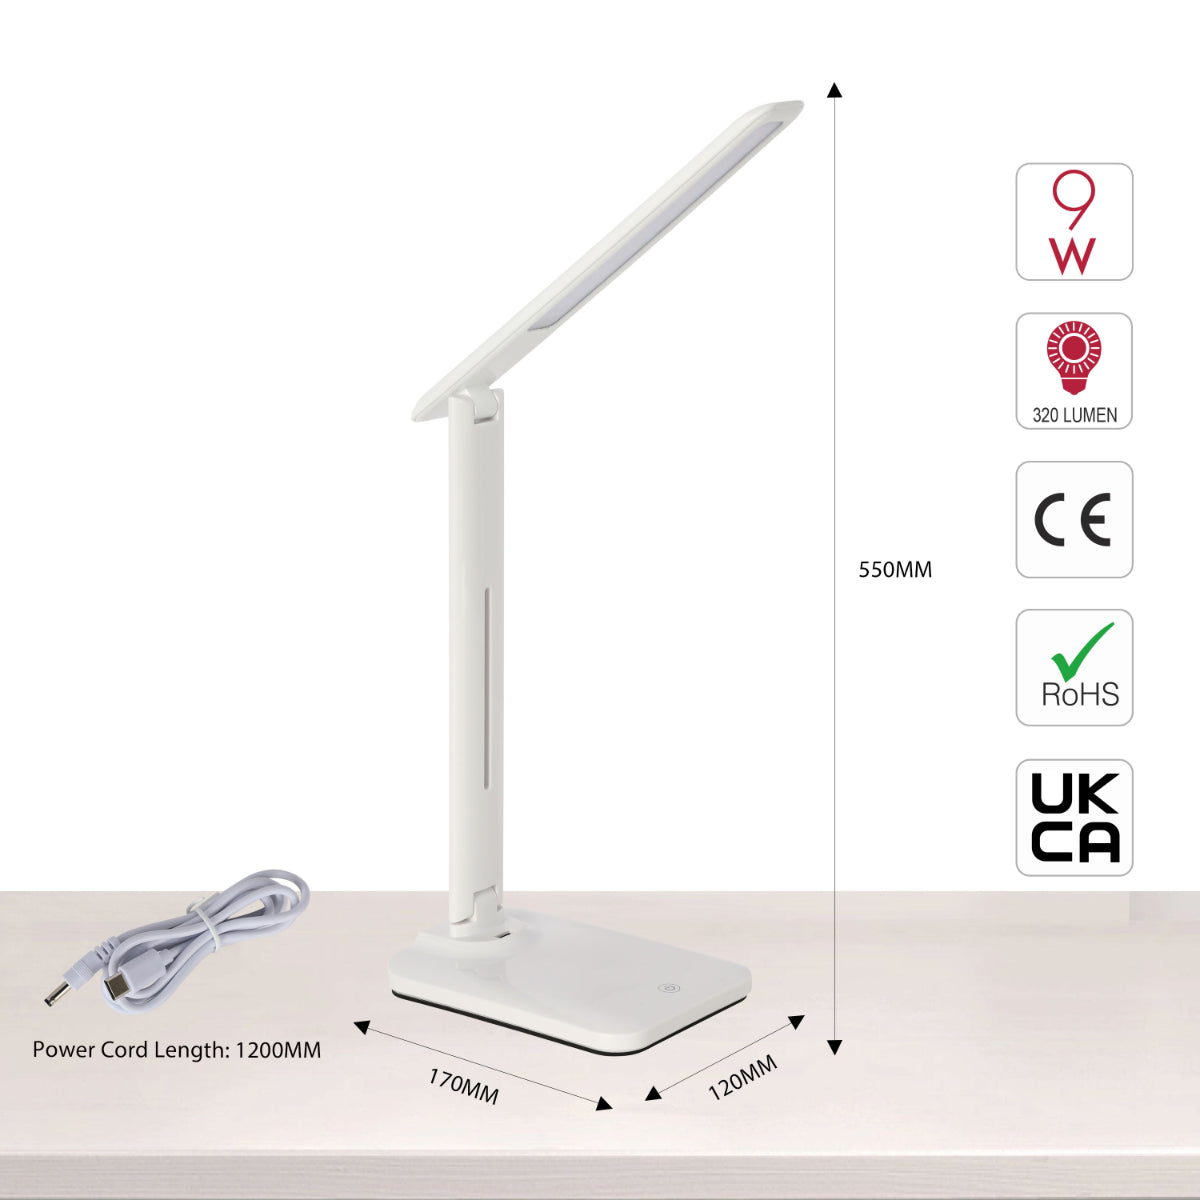 Size and certifications of Foldable LED Desk Lamp with USB Phone Charging Feature 130-03763